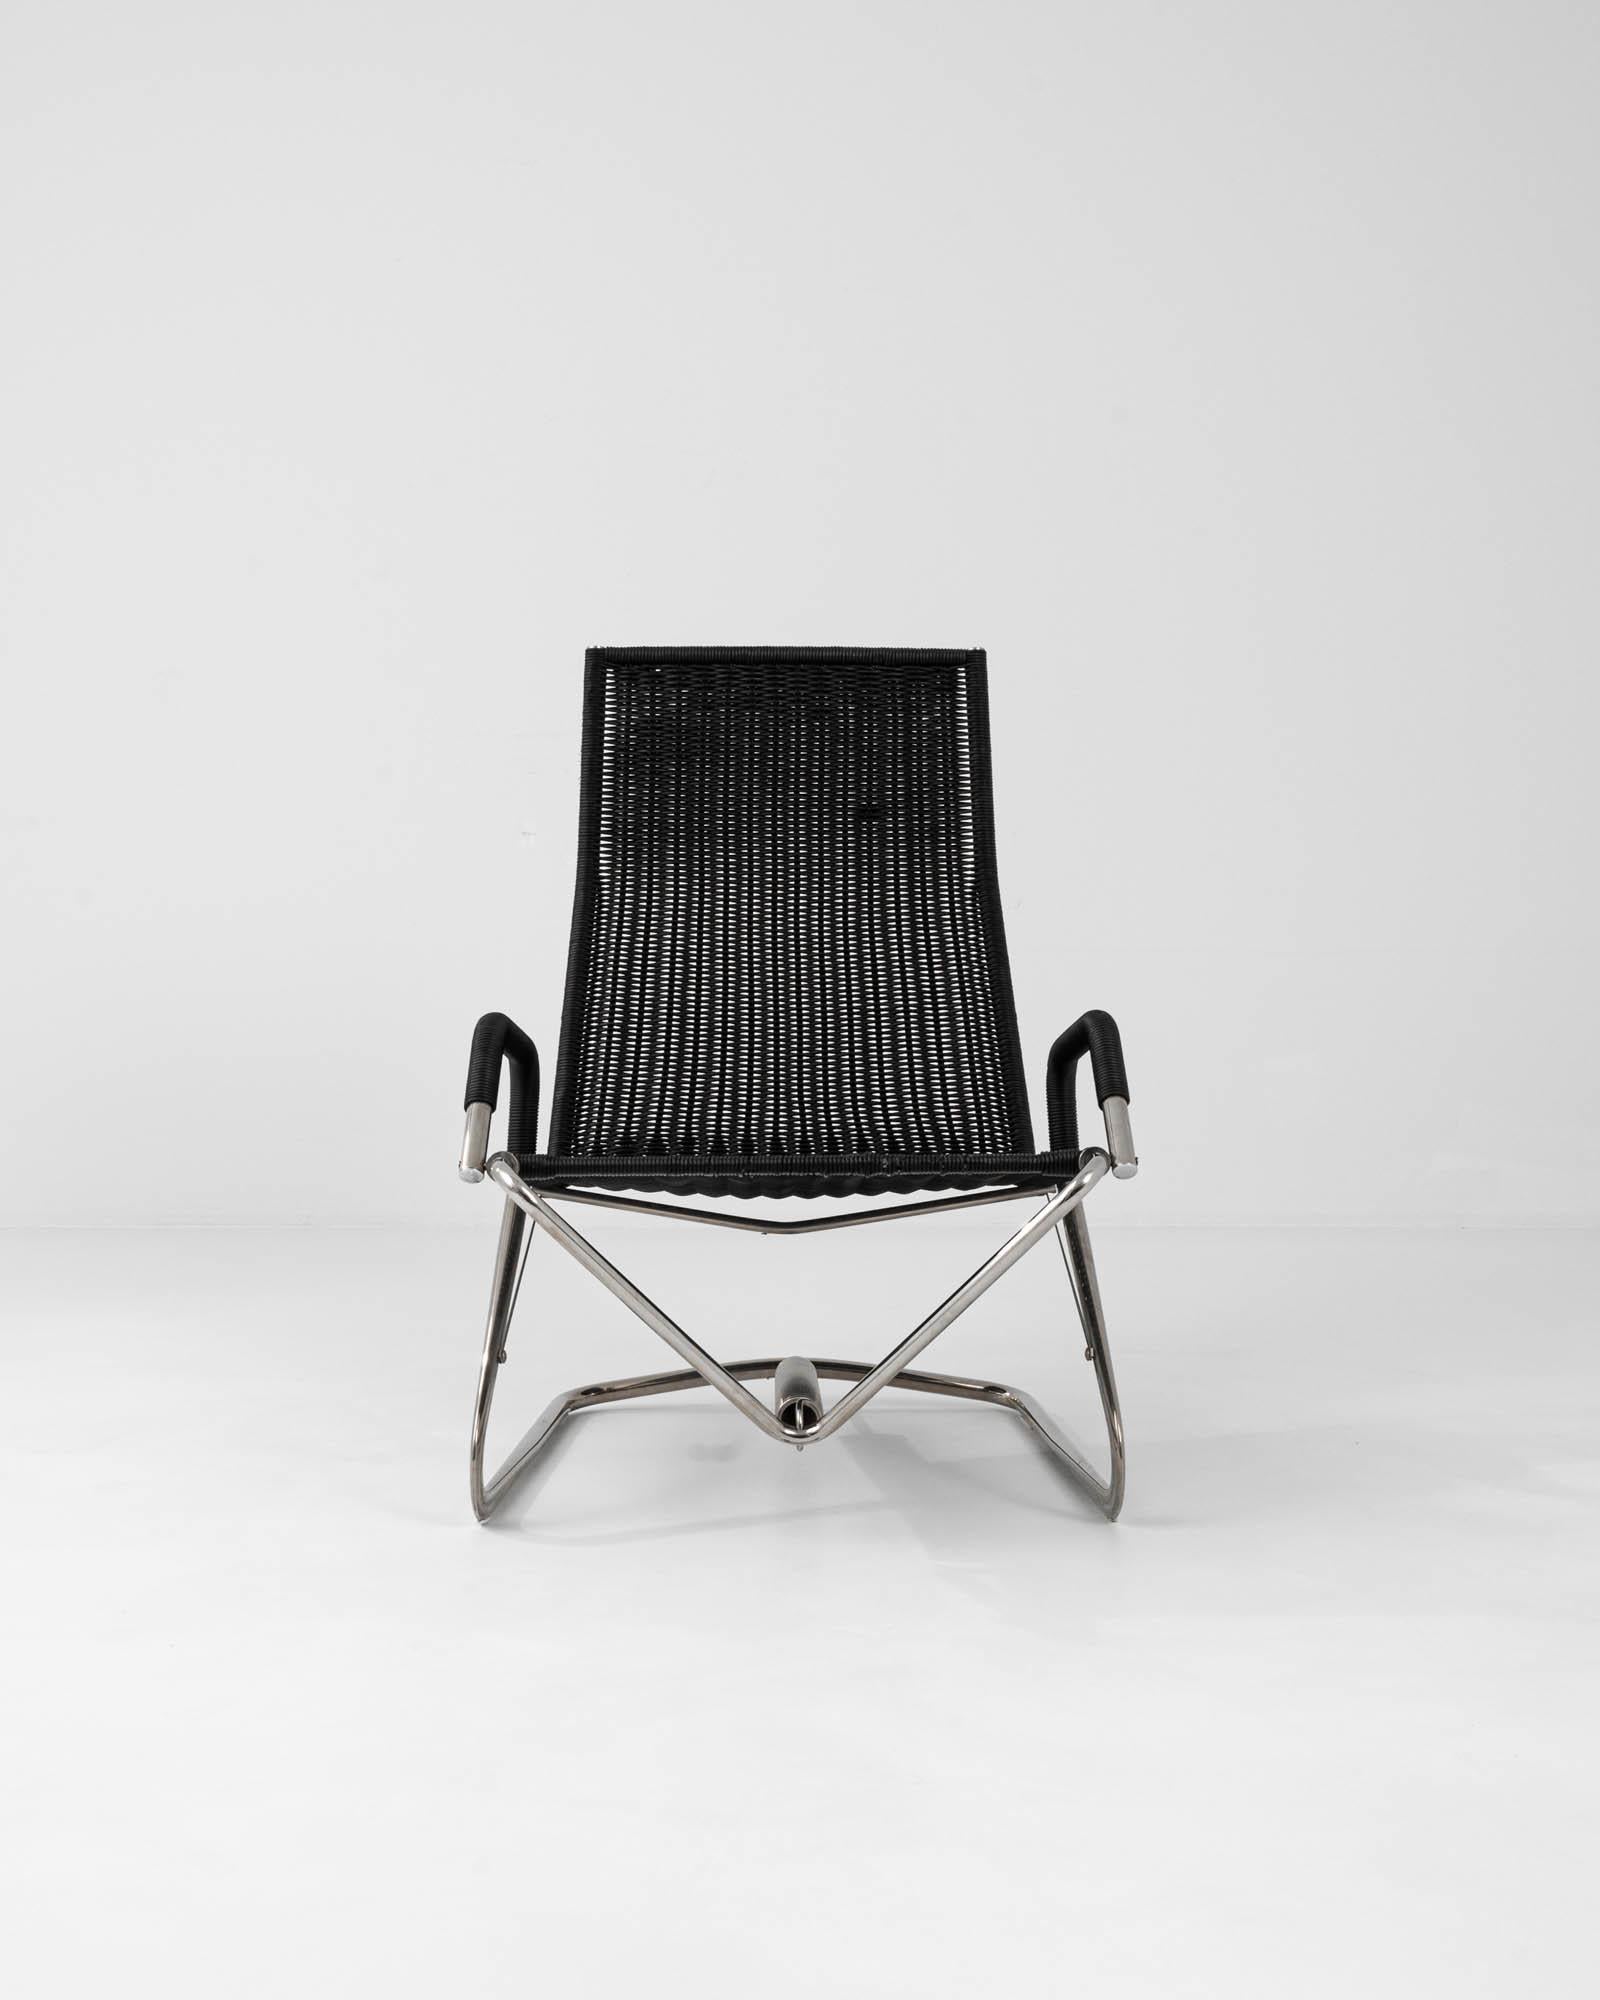 Step into the realm of minimalist design with the 1980s German Metal Armchair by Jean Prouvé. A true representation of functional art, this chair's sleek, chrome-plated frame gleams with the promise of enduring strength and stability. Its ergonomic